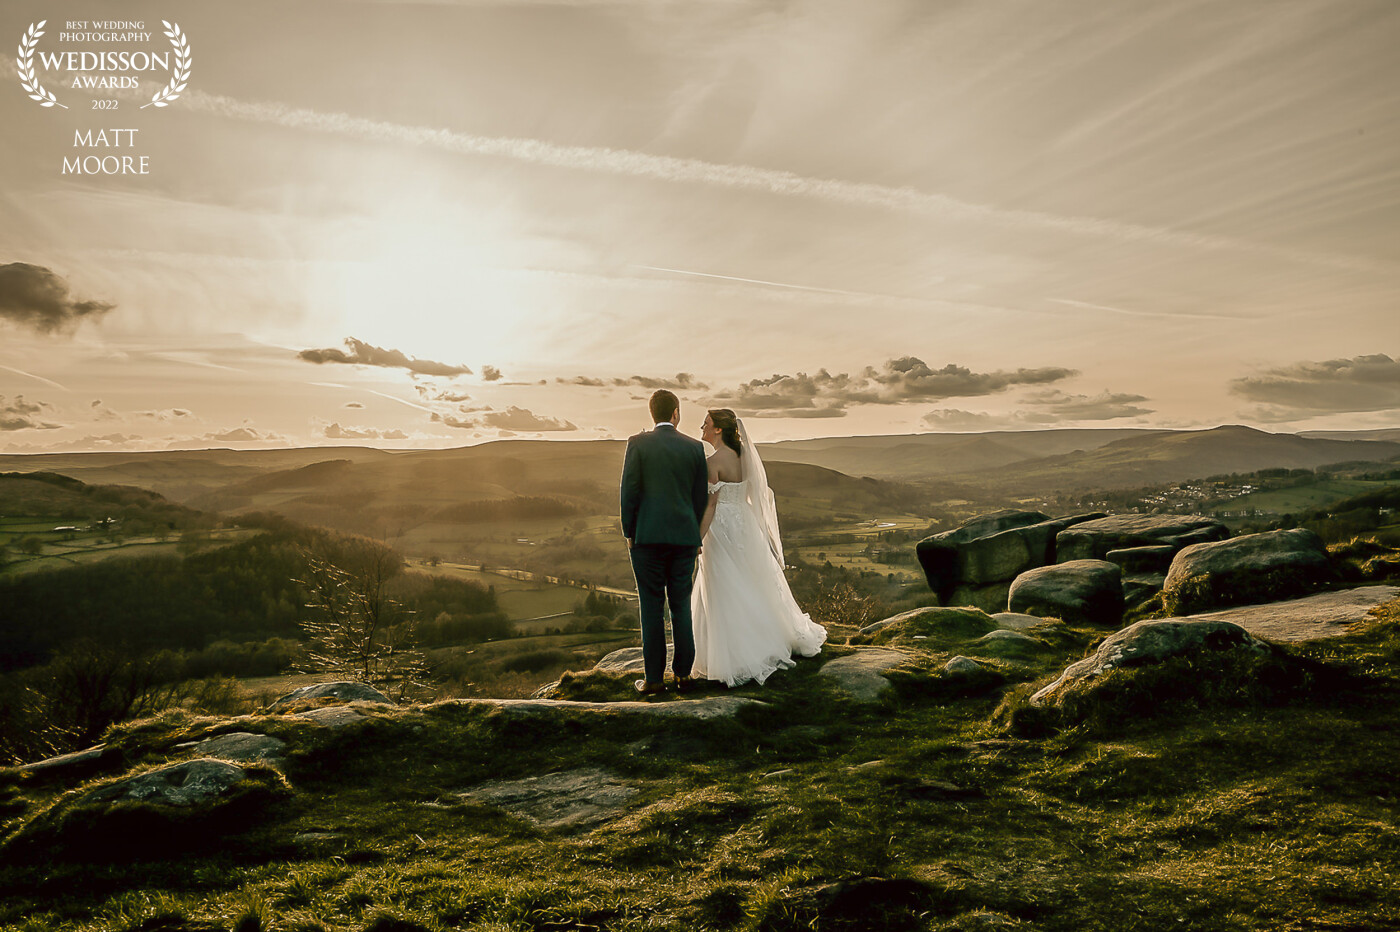 Sam and Emily overlook Derbyshire at Surprise View during the golden hour on their wedding day. We had 15 minutes to capture some epic shots overlooking the countryside and views before hot trotting it back to the venue to see their evening guests and have their first dance